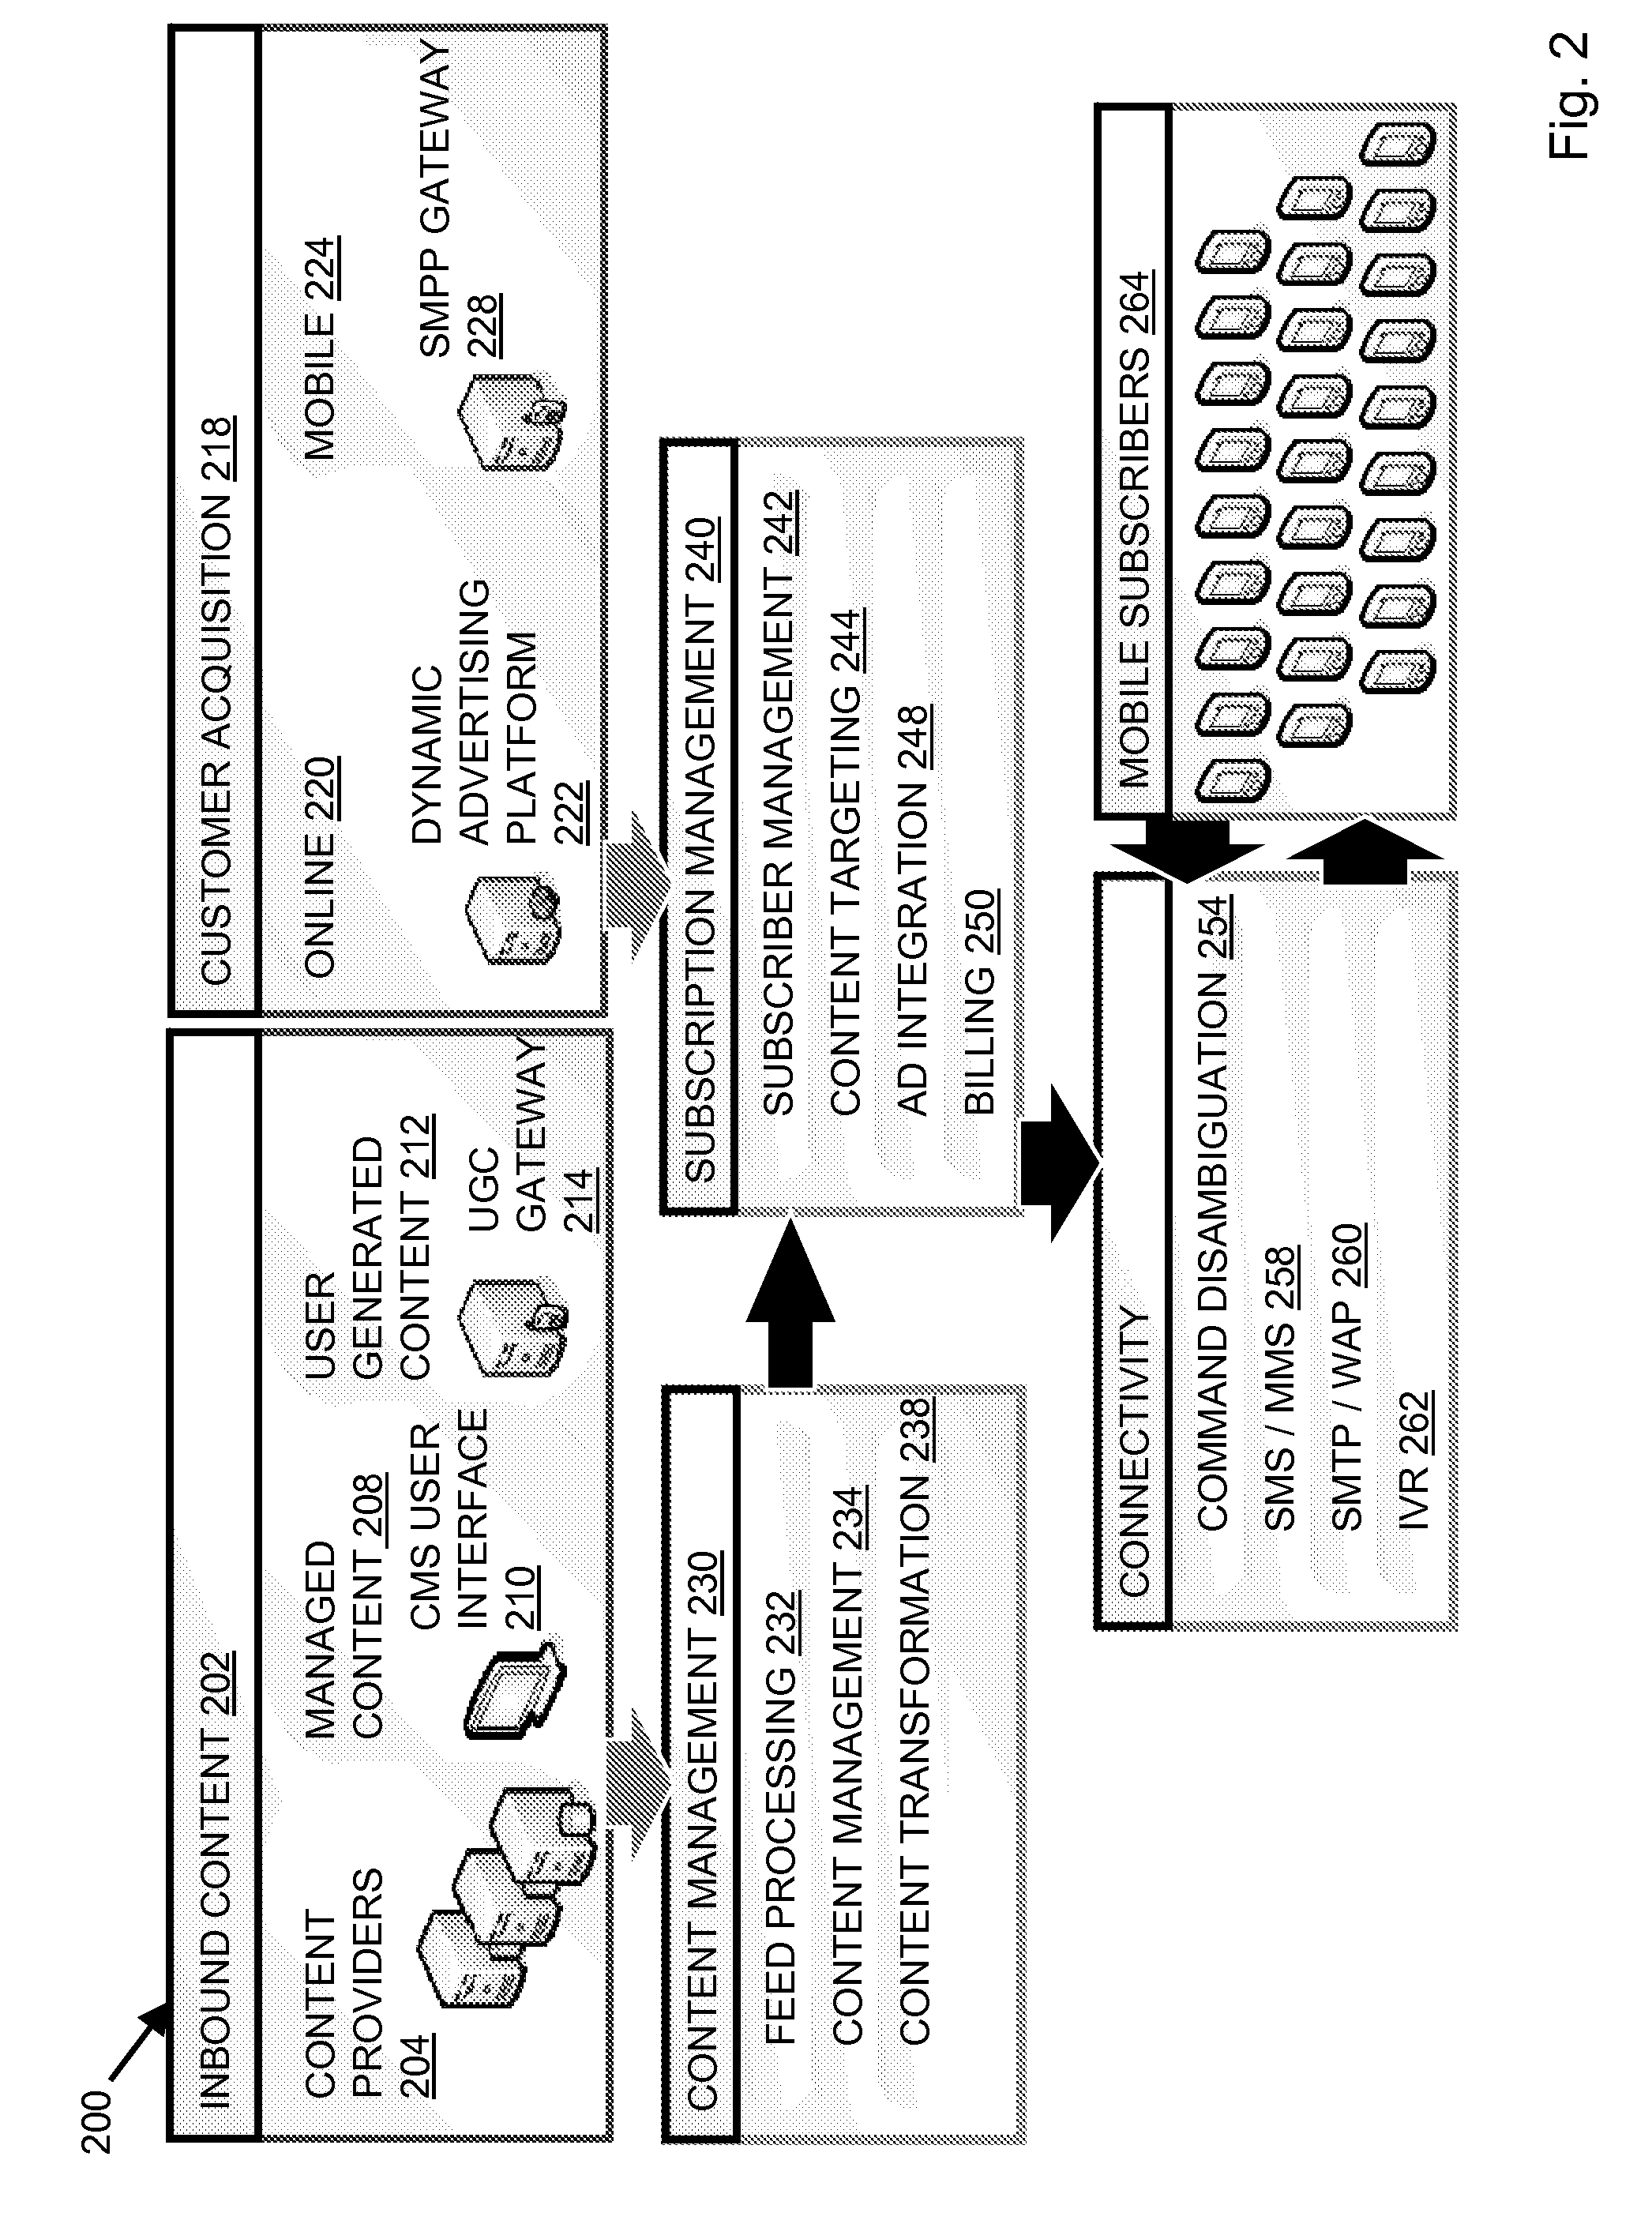 Systems and methods for organizing content for mobile media services